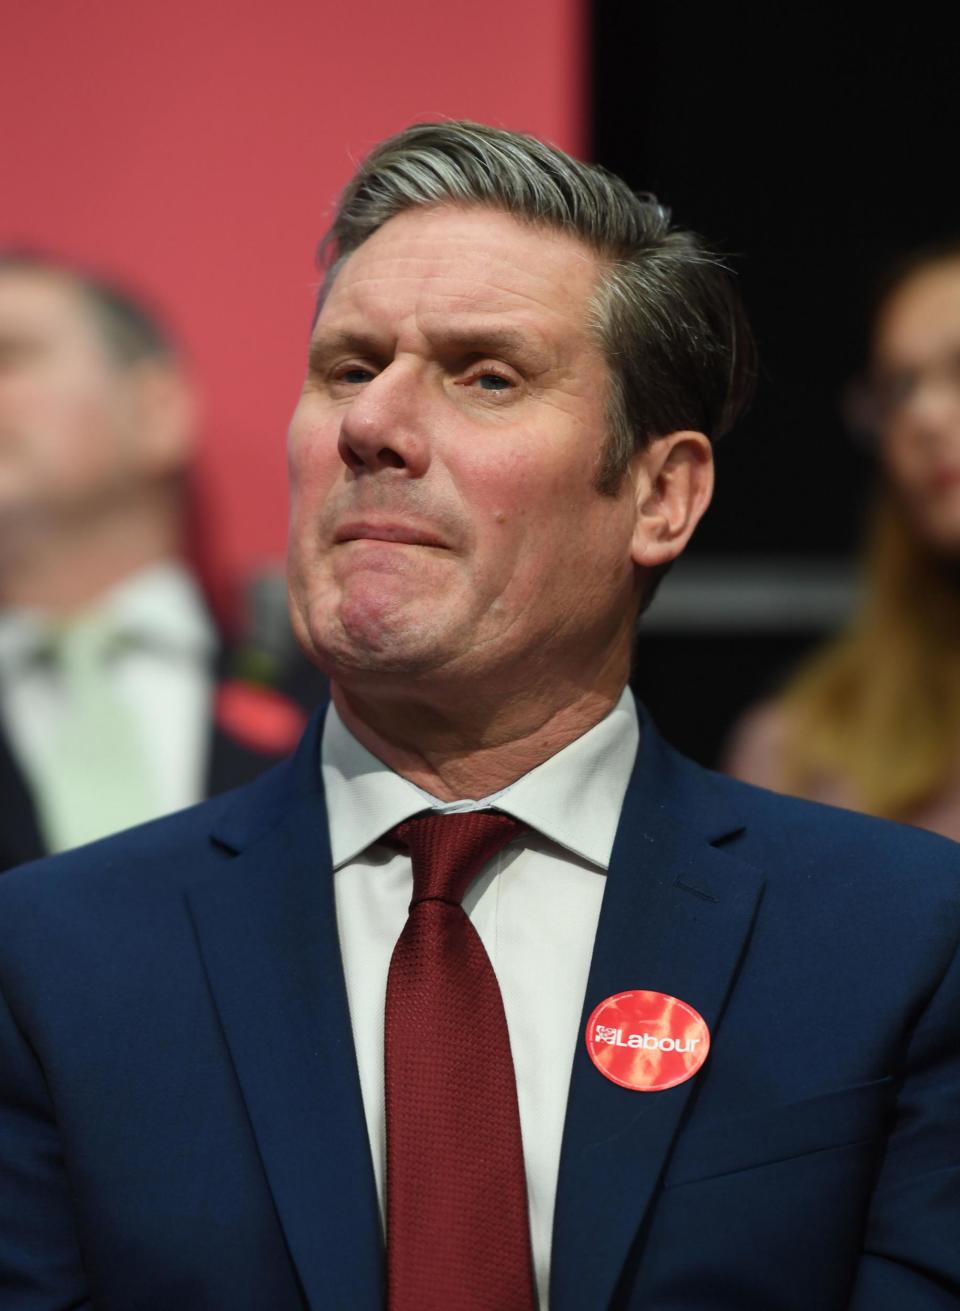 Keir Starmer listens to Labour Party leader Jeremy Corbyn speaking during the launch of his party's manifesto in Birmingham on Thursday (PA)